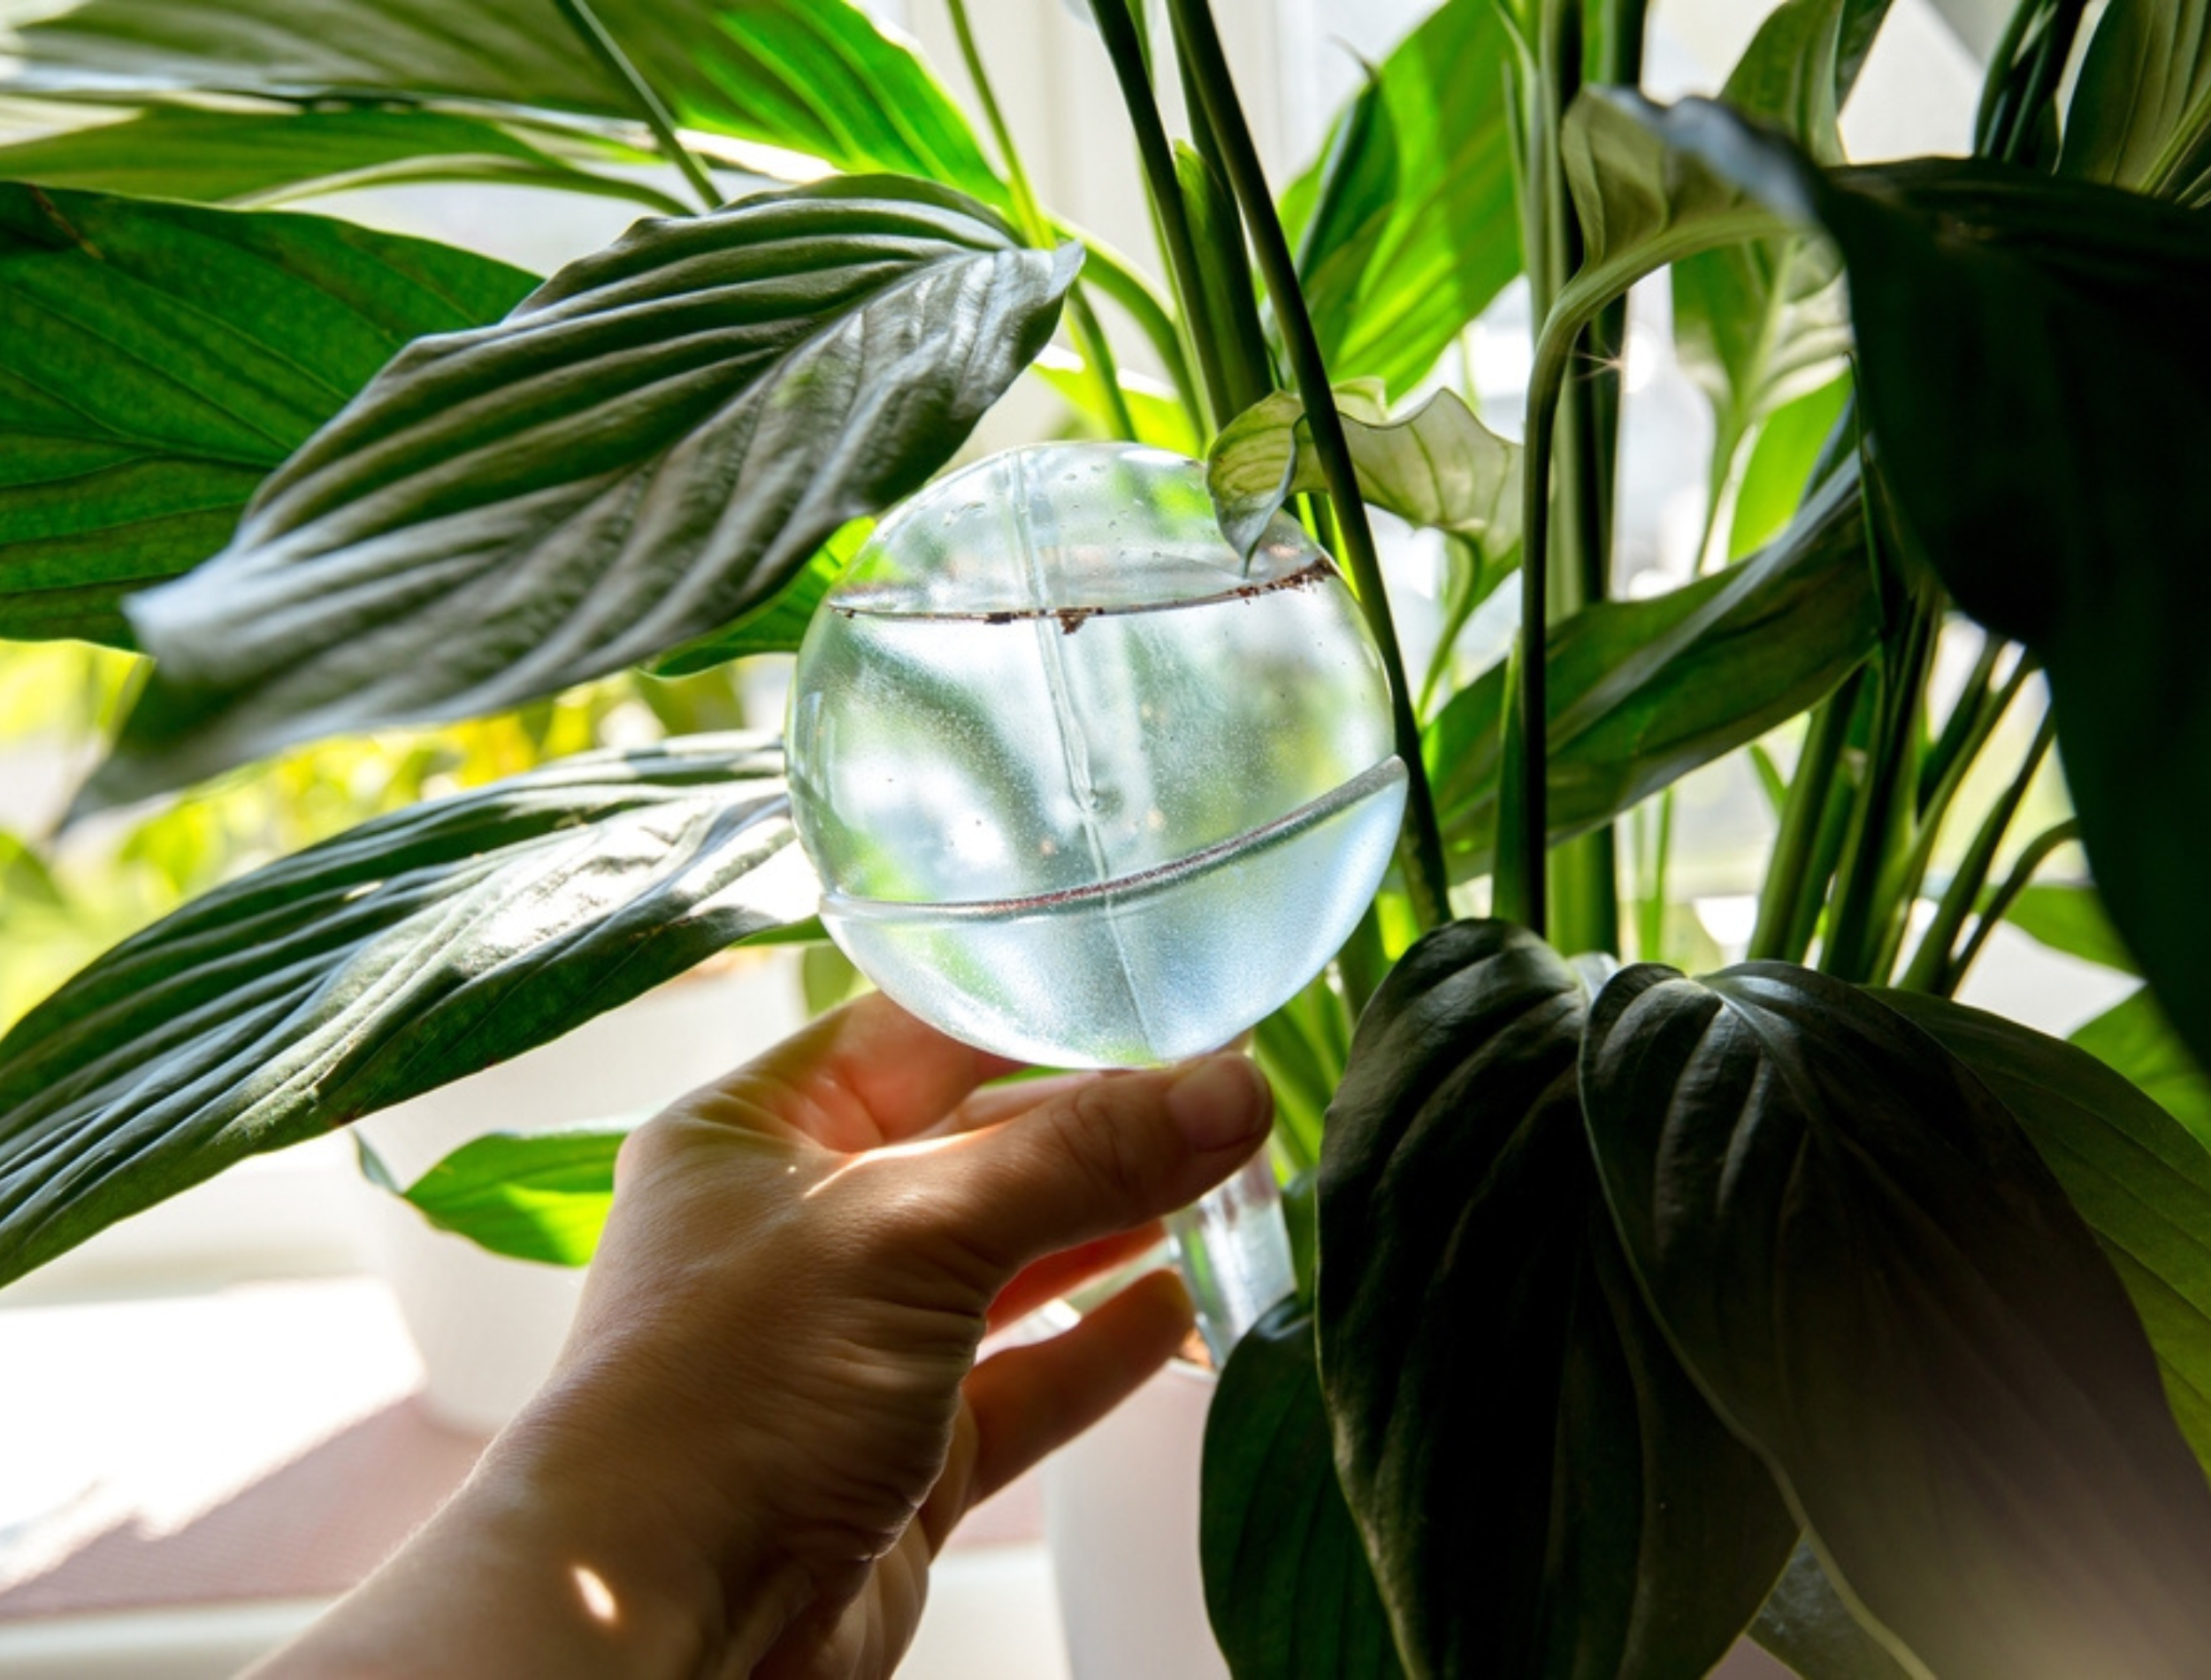 Person hand insert round transparent self watering device globe inside potted peace lilies